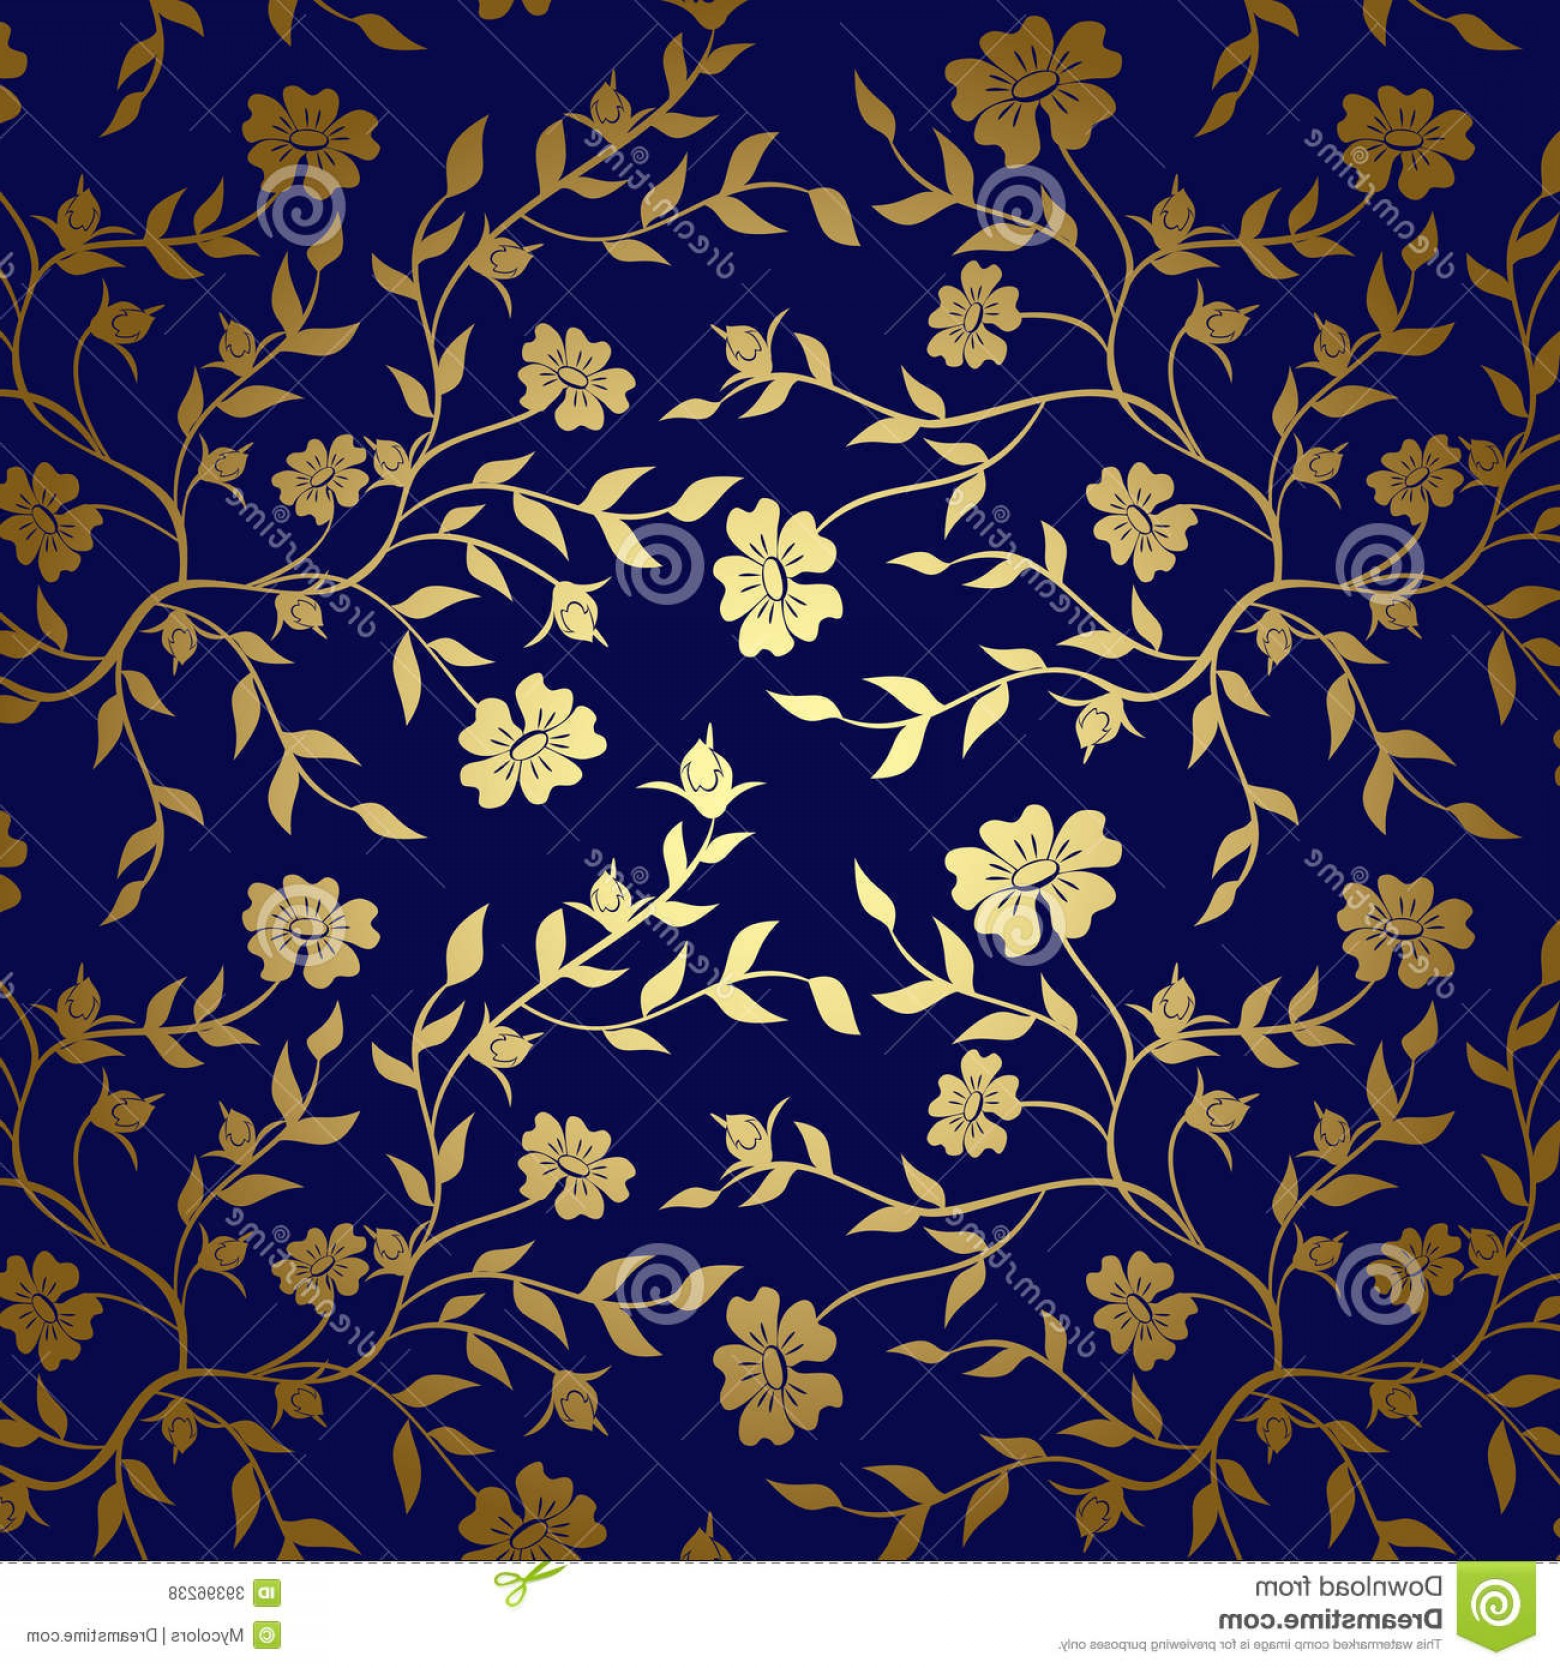 Floral Texture Vector at Vectorified.com | Collection of Floral Texture ...